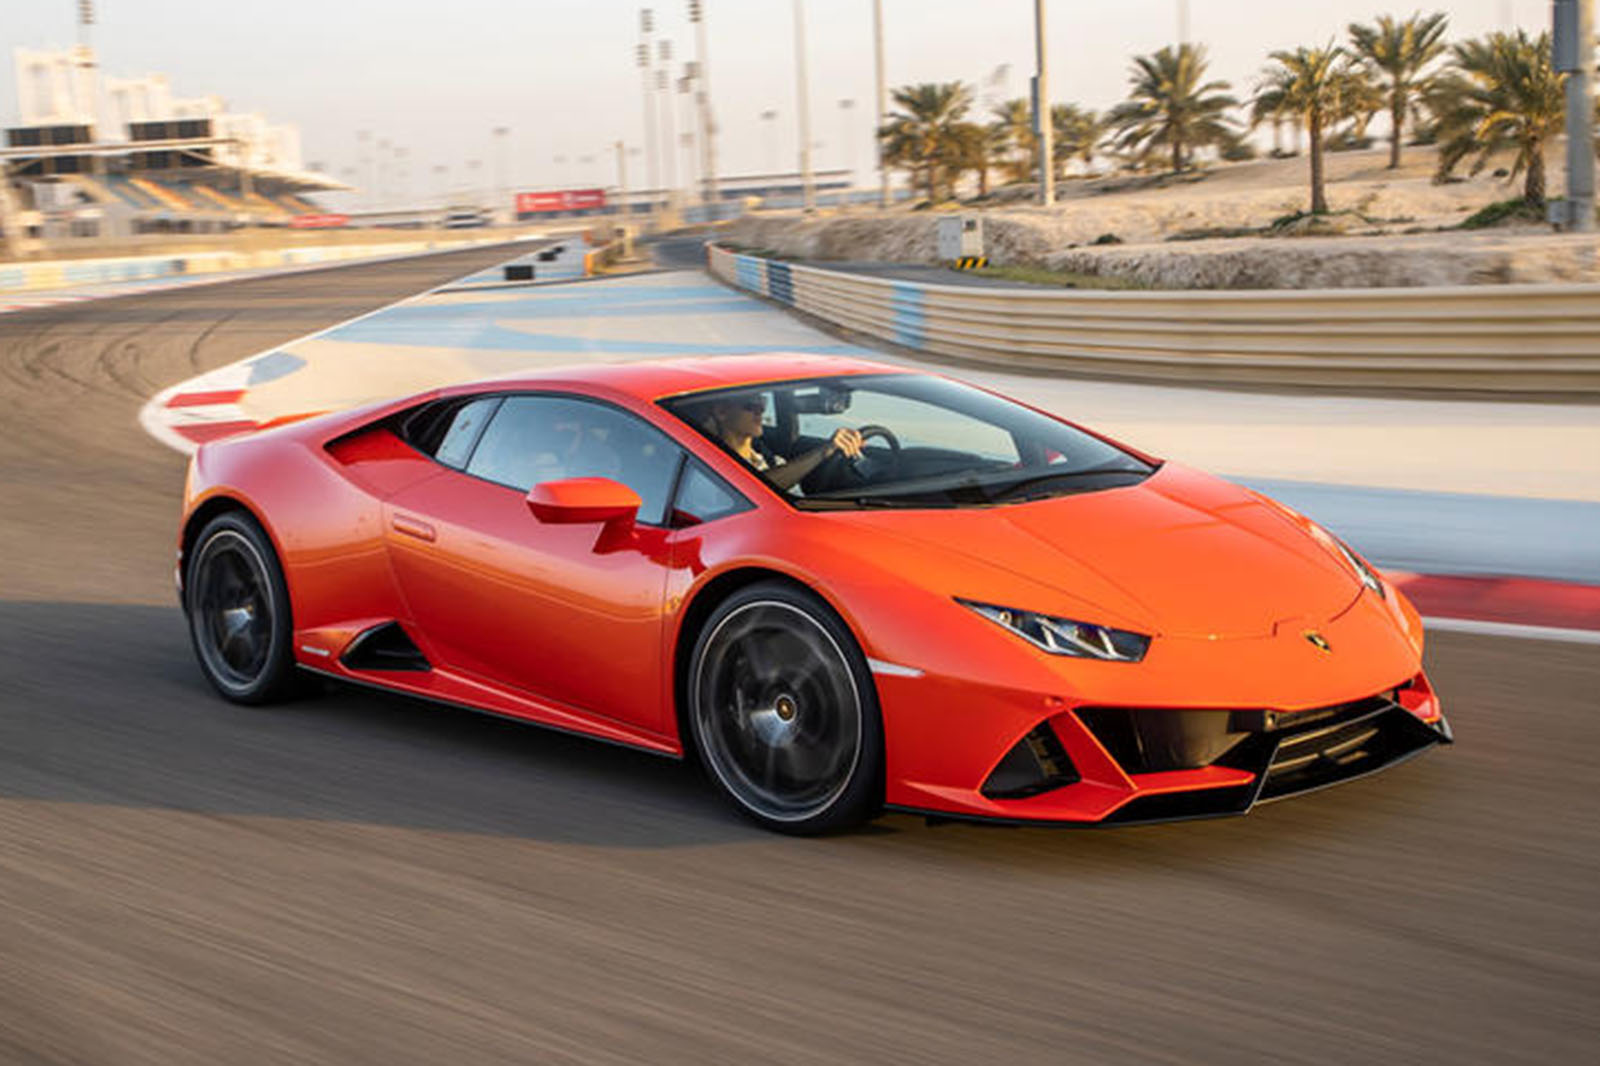 What Amazon & Lamborghini's Partnership Means For Ordinary Car Owners